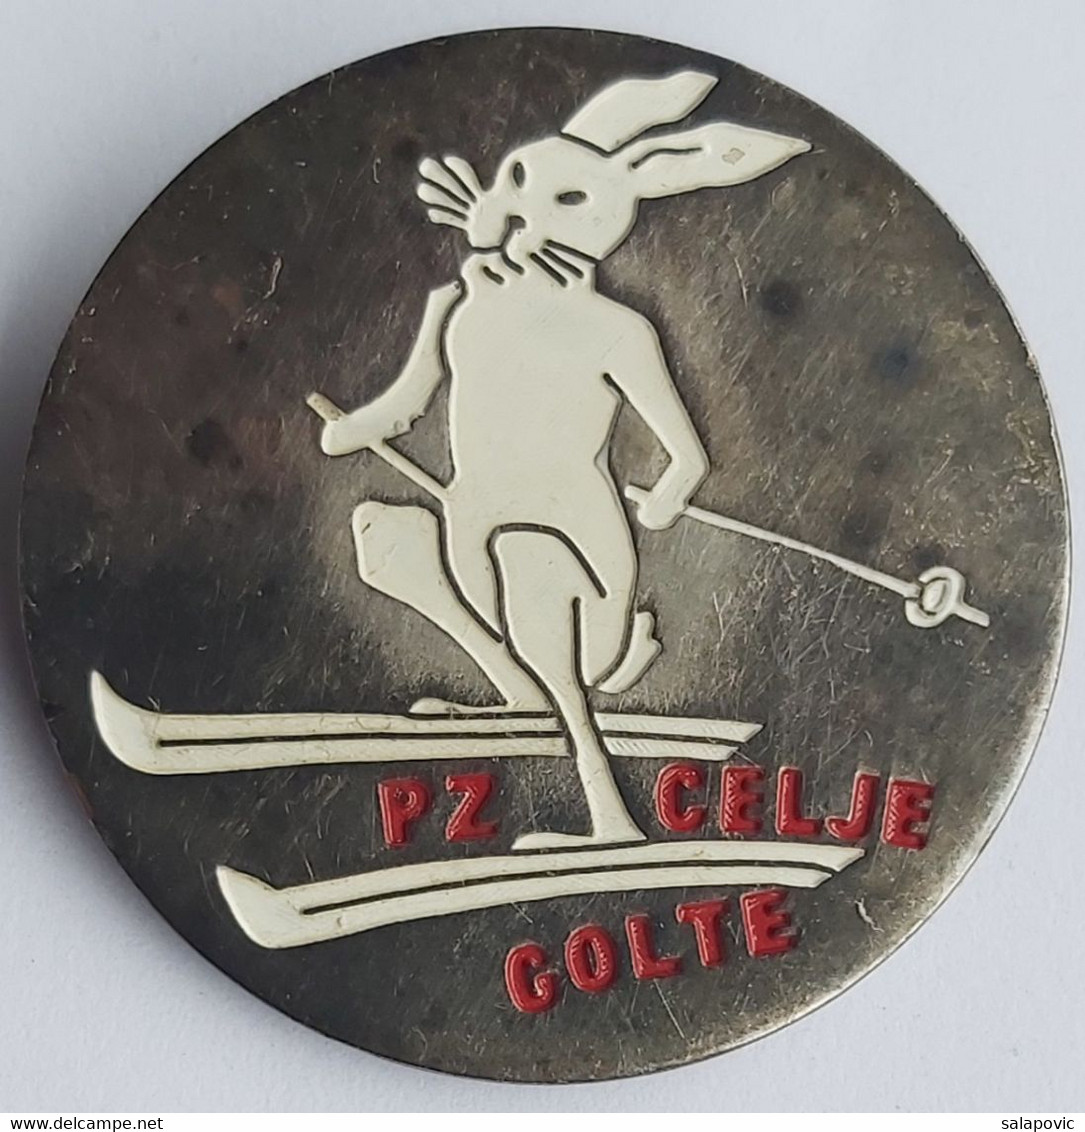 PZ Celje Golte Skiing Slovenia Alpinism (Mountaineering / Hiking) PIN P3/4 - Sports D'hiver